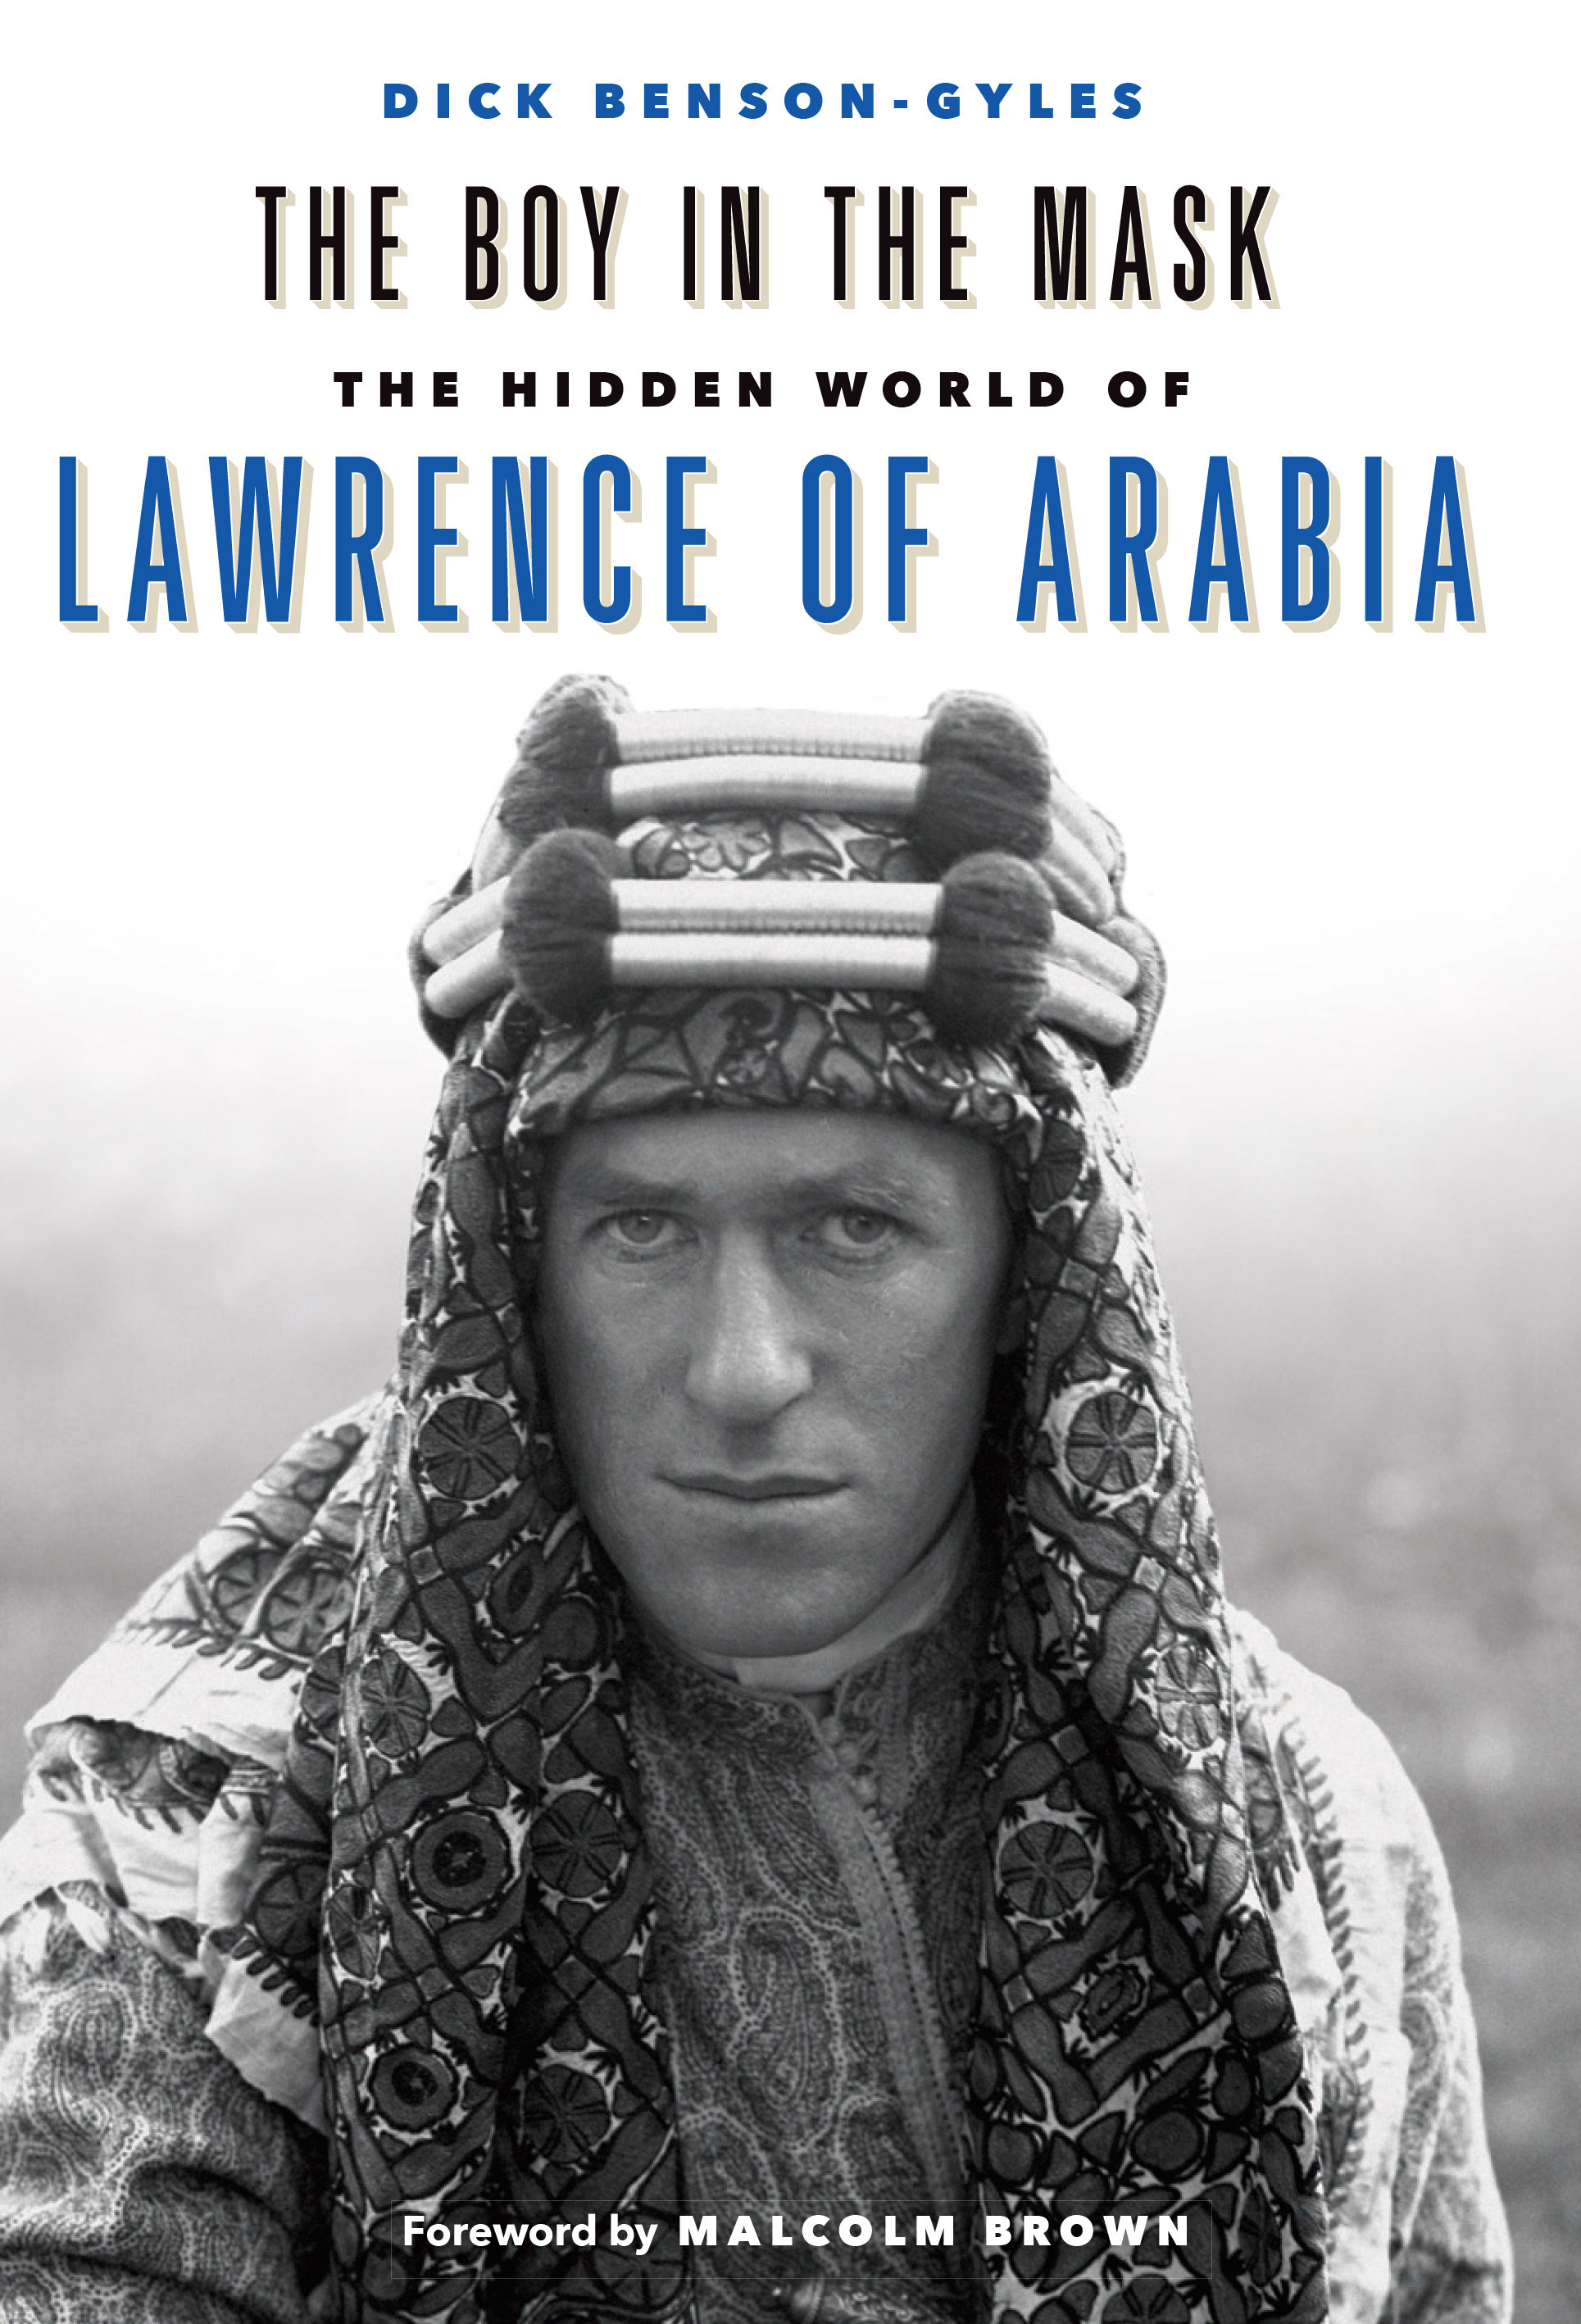 The Boy in the Mask - The Hidden World of Lawrence of Arabia